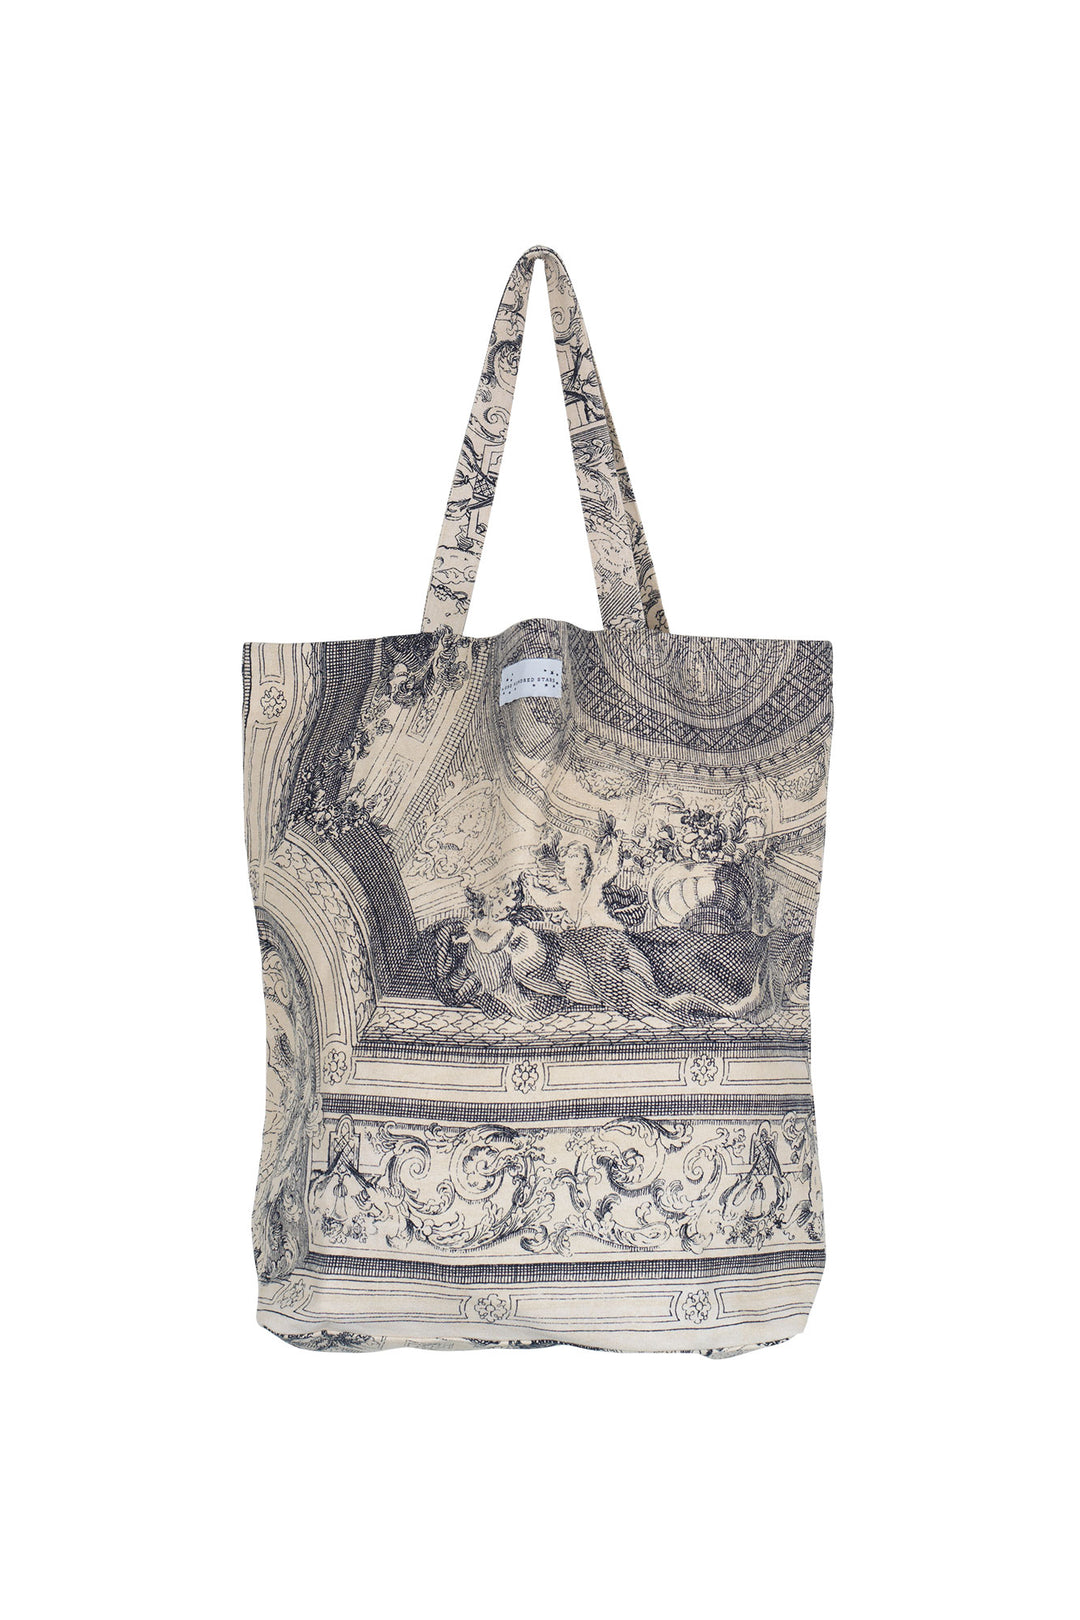 Women's accessories, shopping bag or beach bag with cherub print, reusable and sustainable canvas tote bag by One Hundred Stars